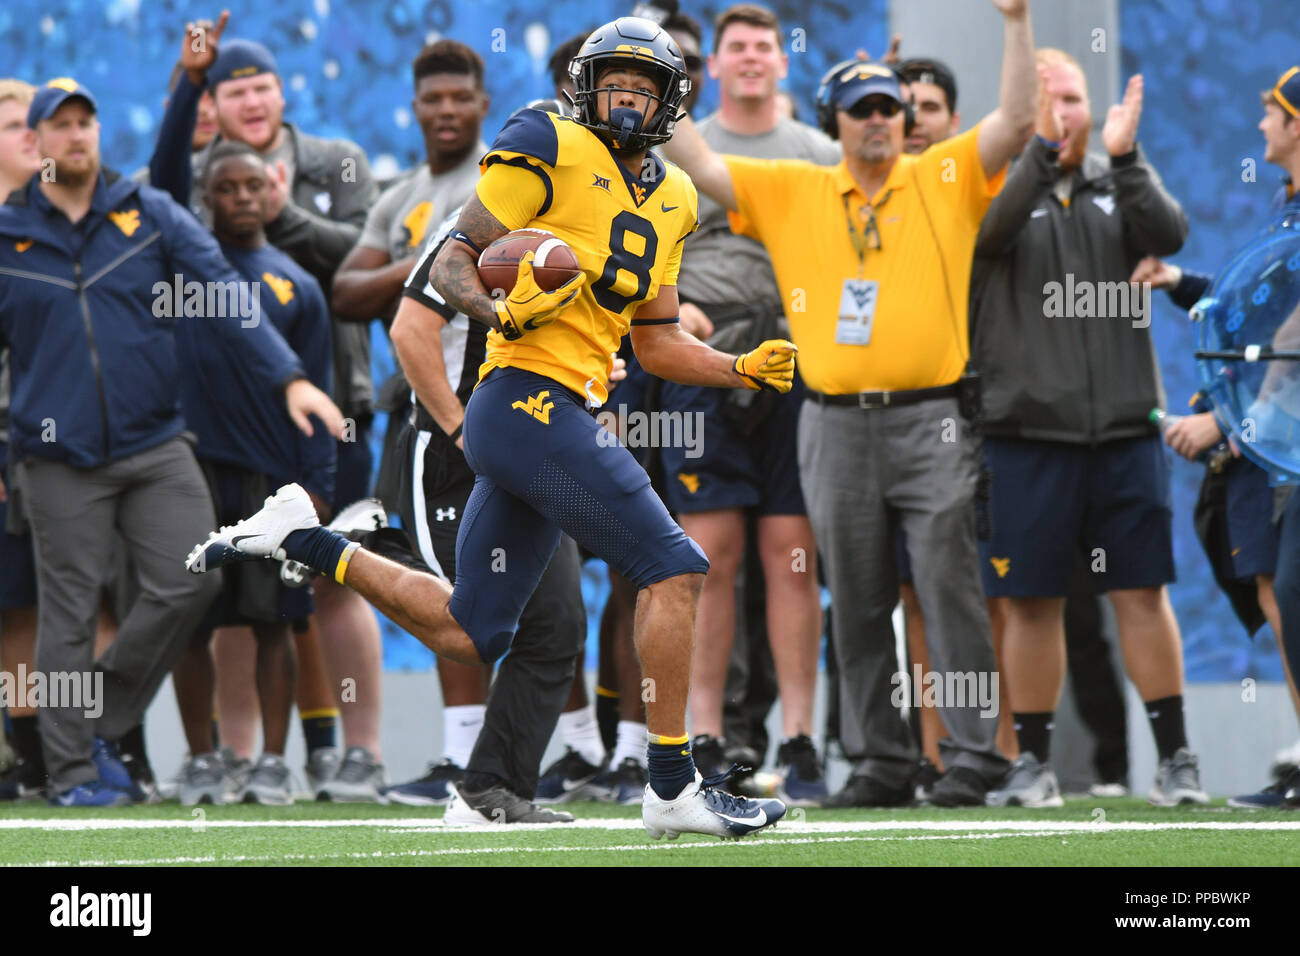 Morgantown, West Virginia, USA. 22nd Sep, 2018. West Virginia Mountaineers wide receiver MARCUS SIMMS (8) scores a touchdown during the Big 12 football game played at Mountaineer Field in Morgantown, WV. WVU beat Kansas State 35-6. Credit: Ken Inness/ZUMA Wire/Alamy Live News Stock Photo